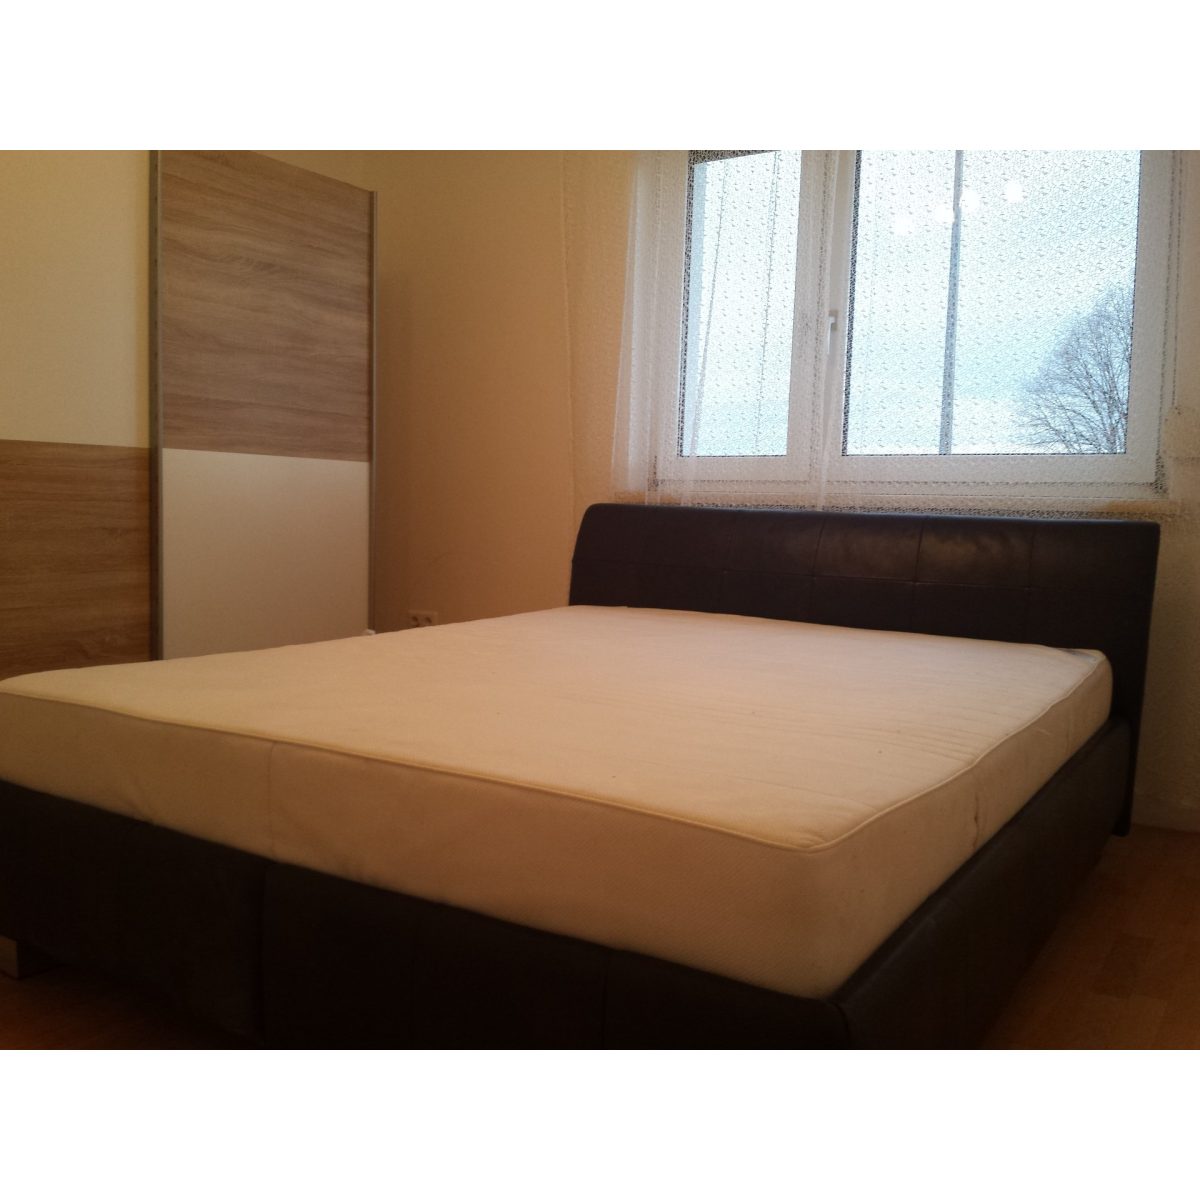 Dazzling 2 bedroom apartment in Zagreb for rent (Students only) | Zagreb apartment for rent 3